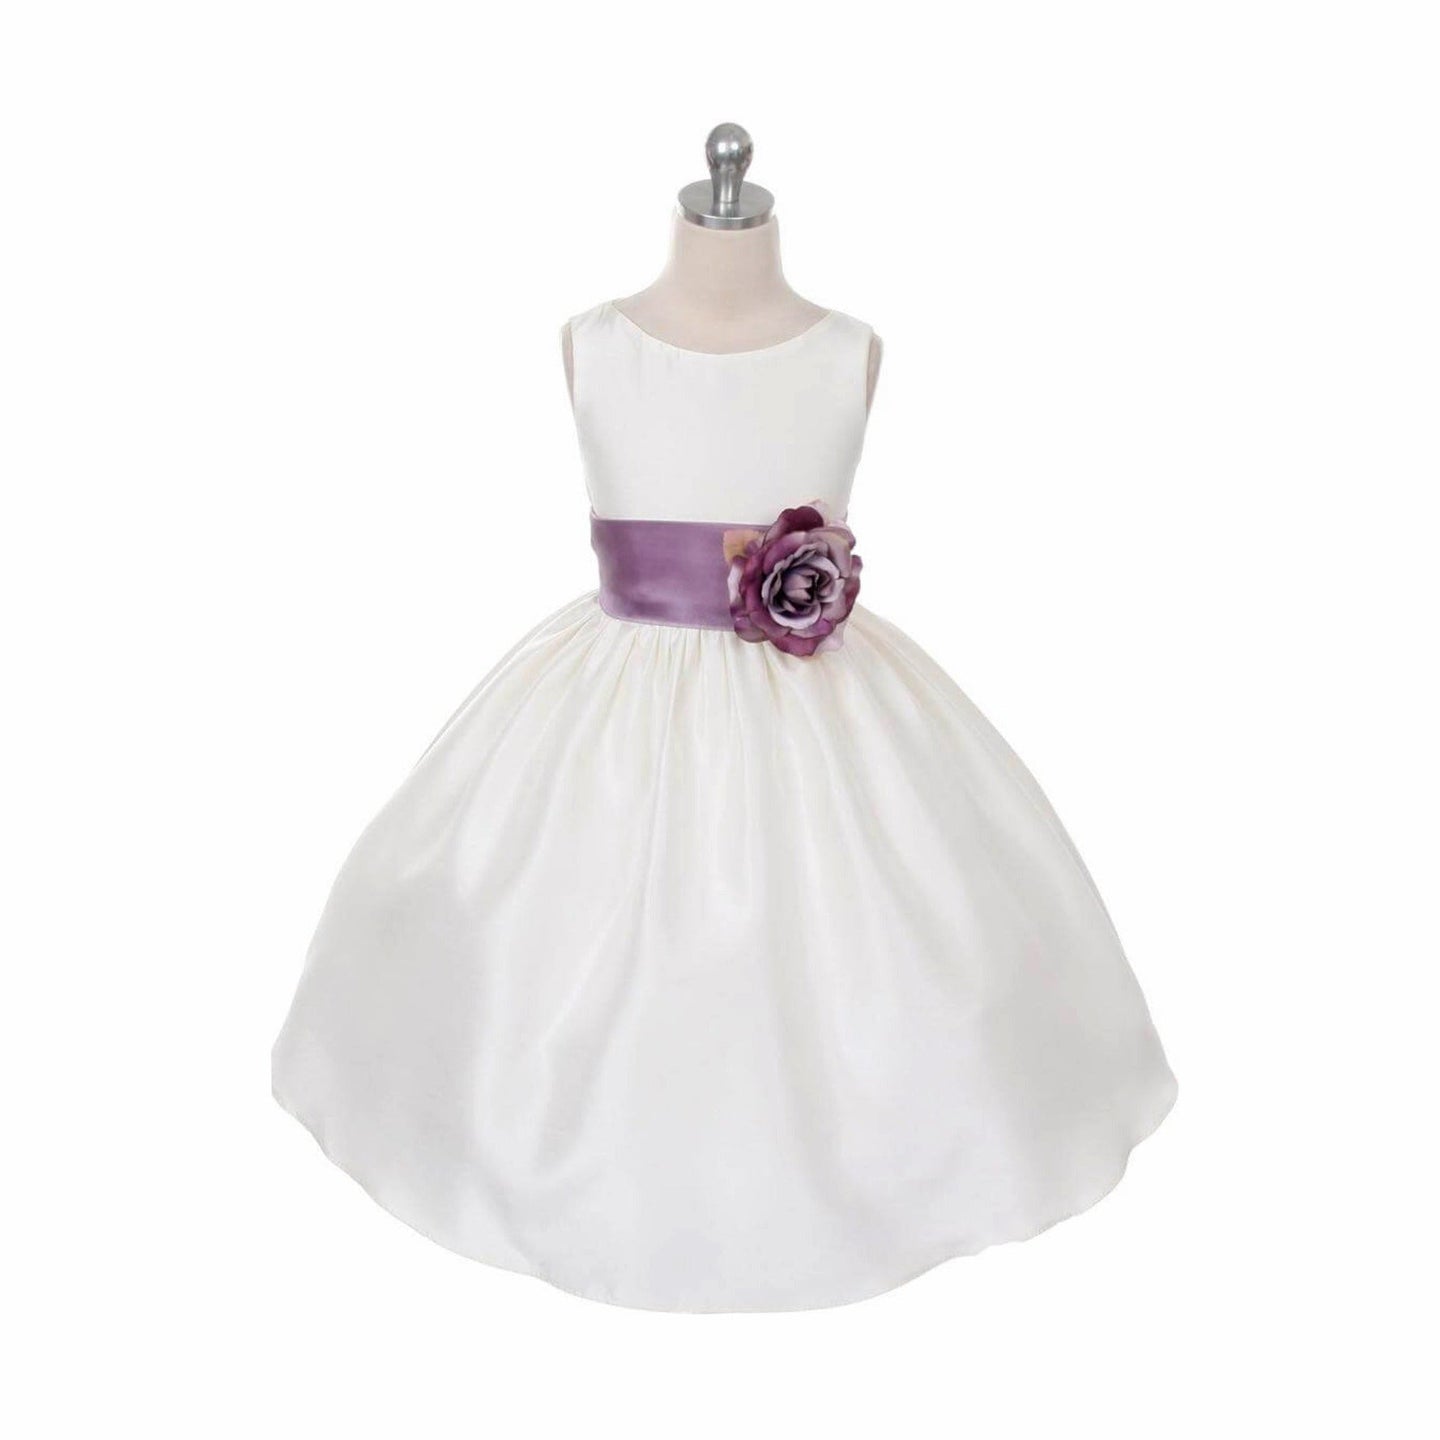 UK Flower Girl Boutique Morgan Dress in Ivory  with purple sash